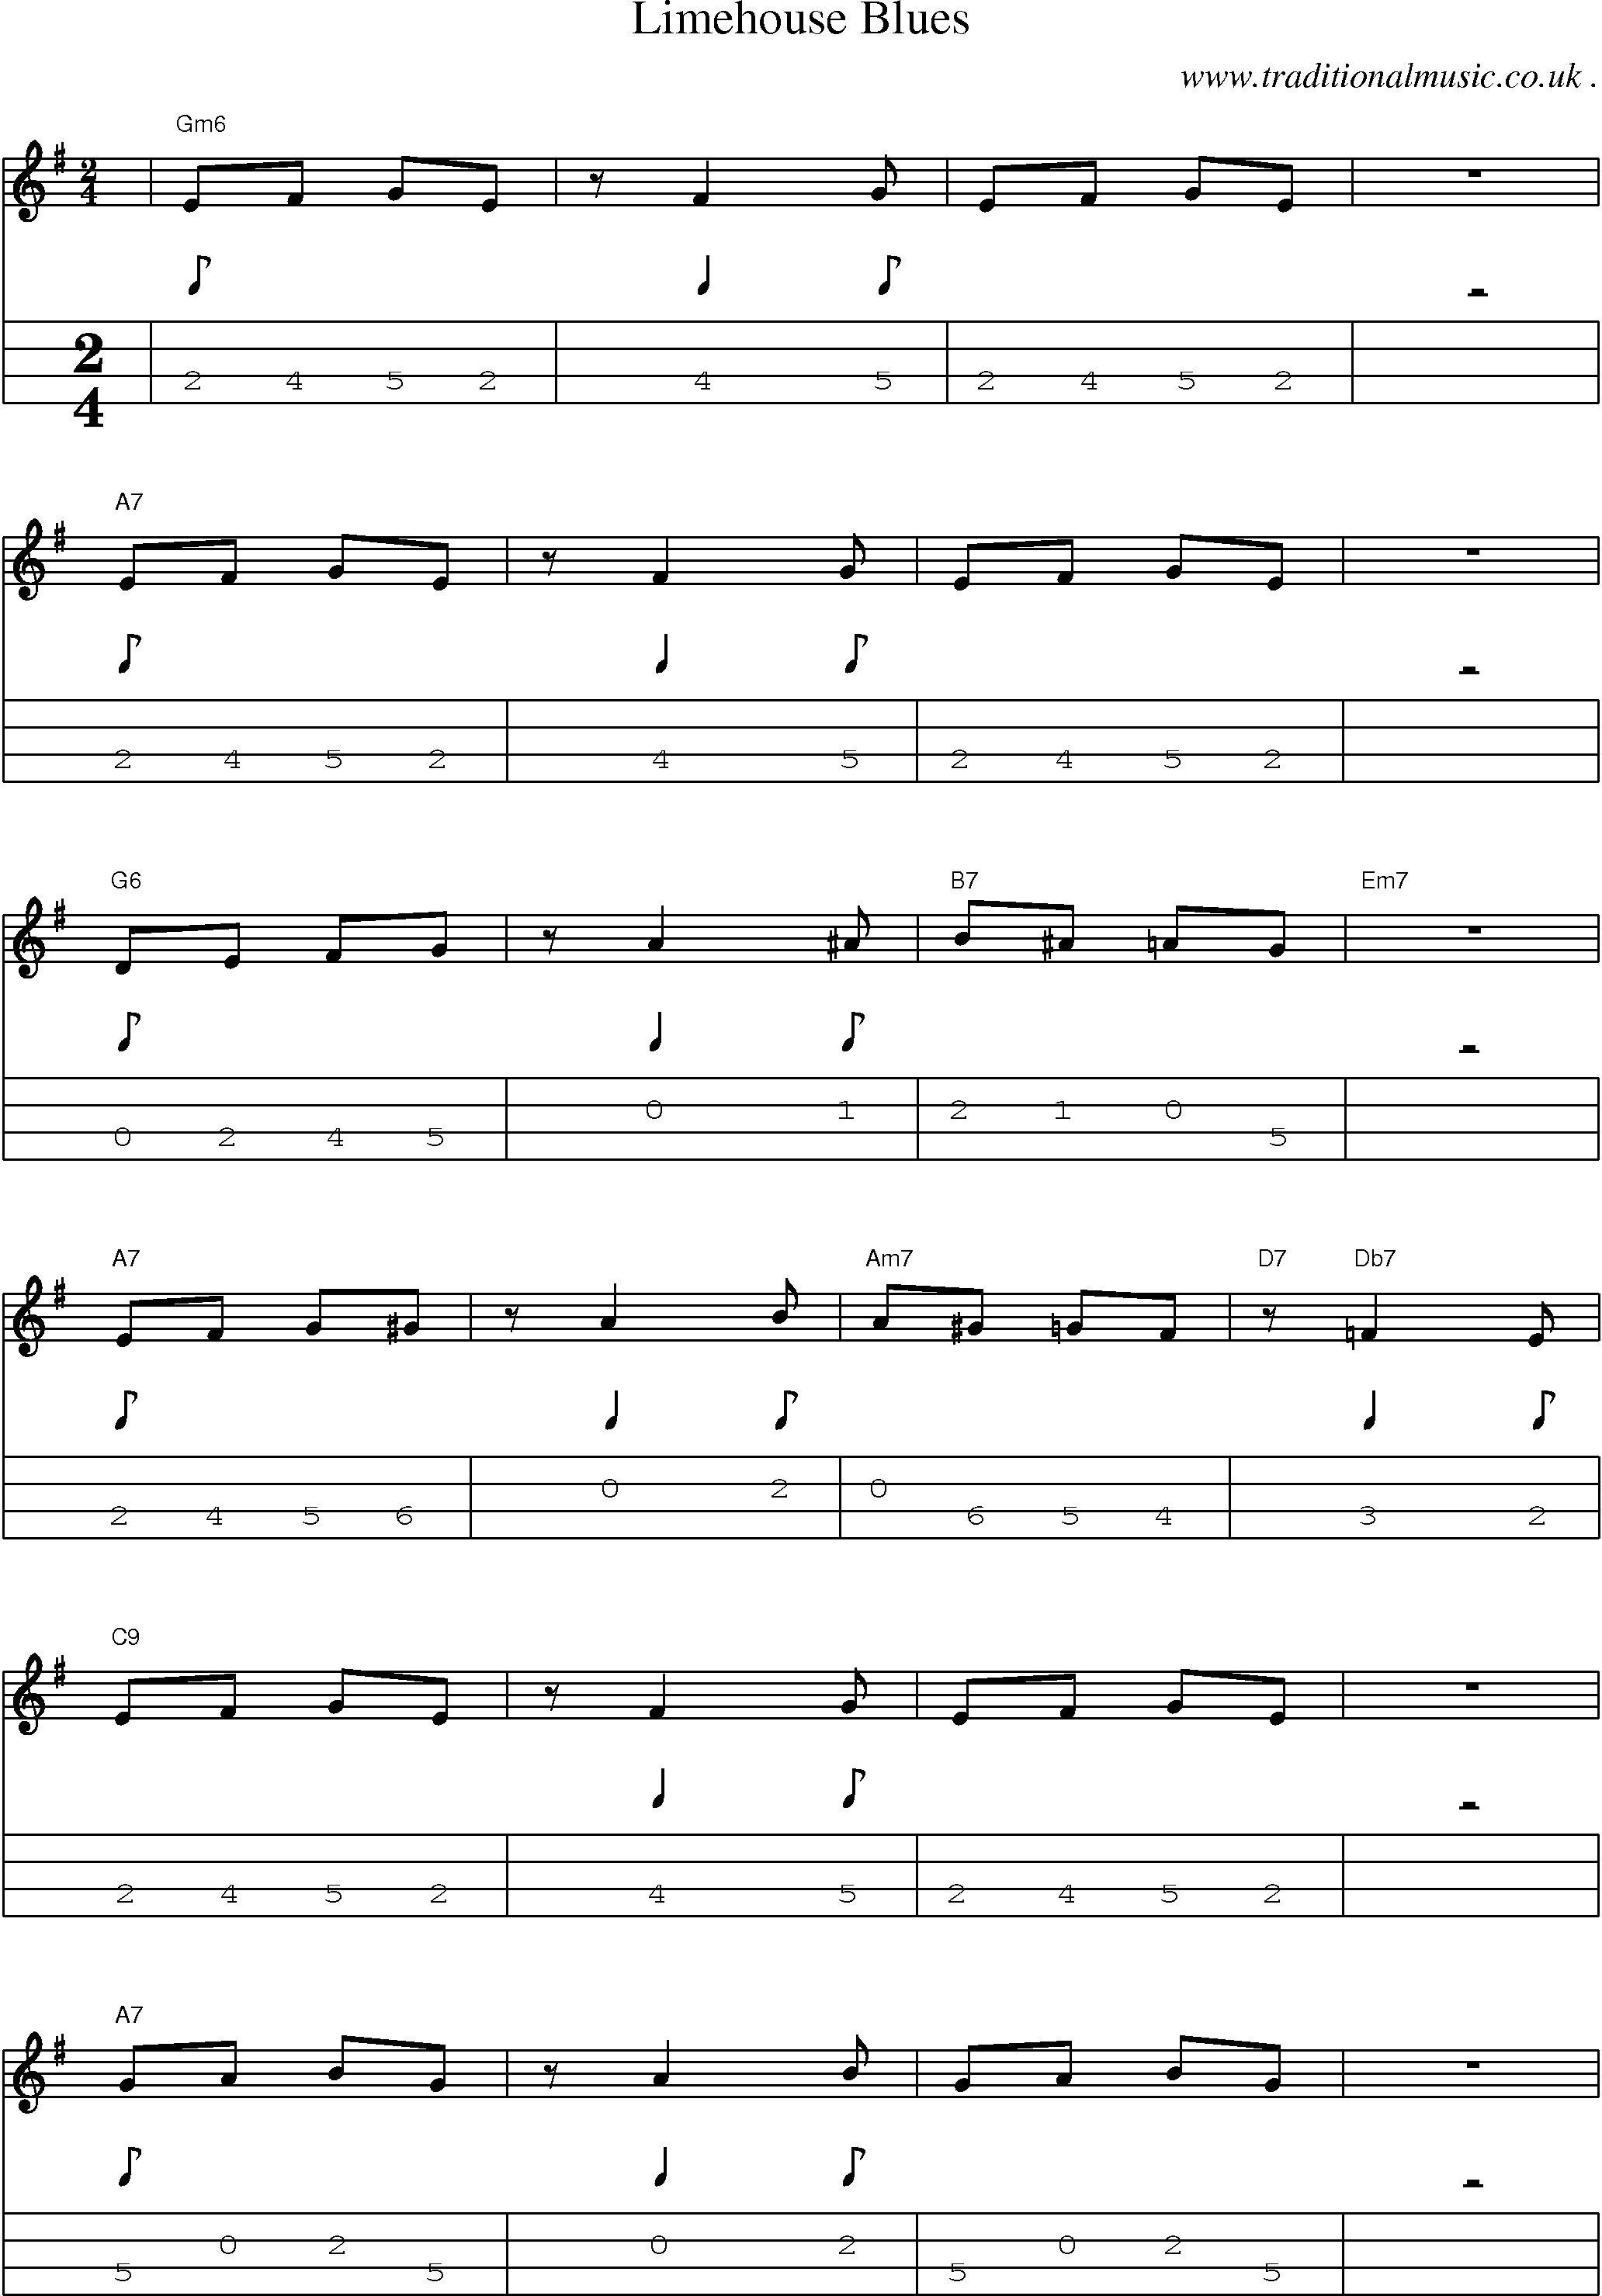 Music Score and Guitar Tabs for Limehouse Blues